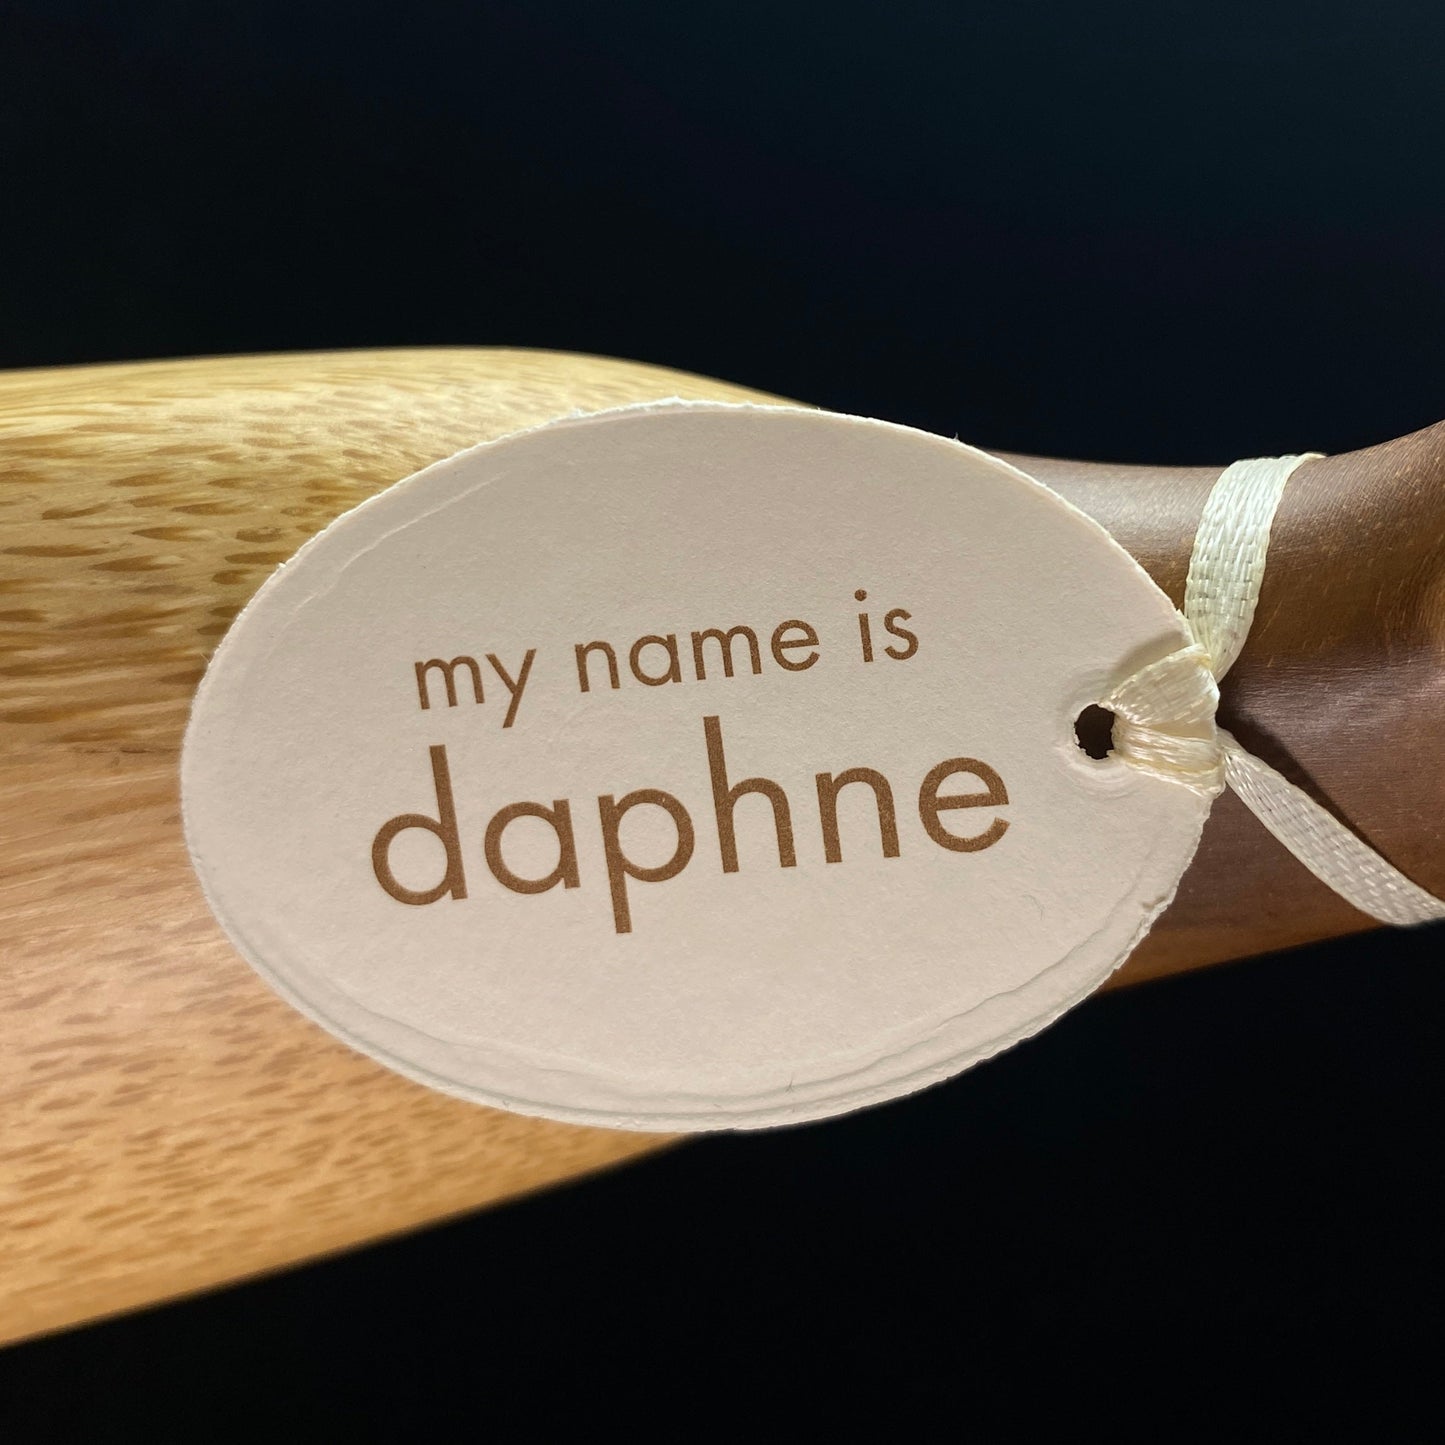 Daphne - Hand-carved and Hand-painted Bamboo Duck with Polka